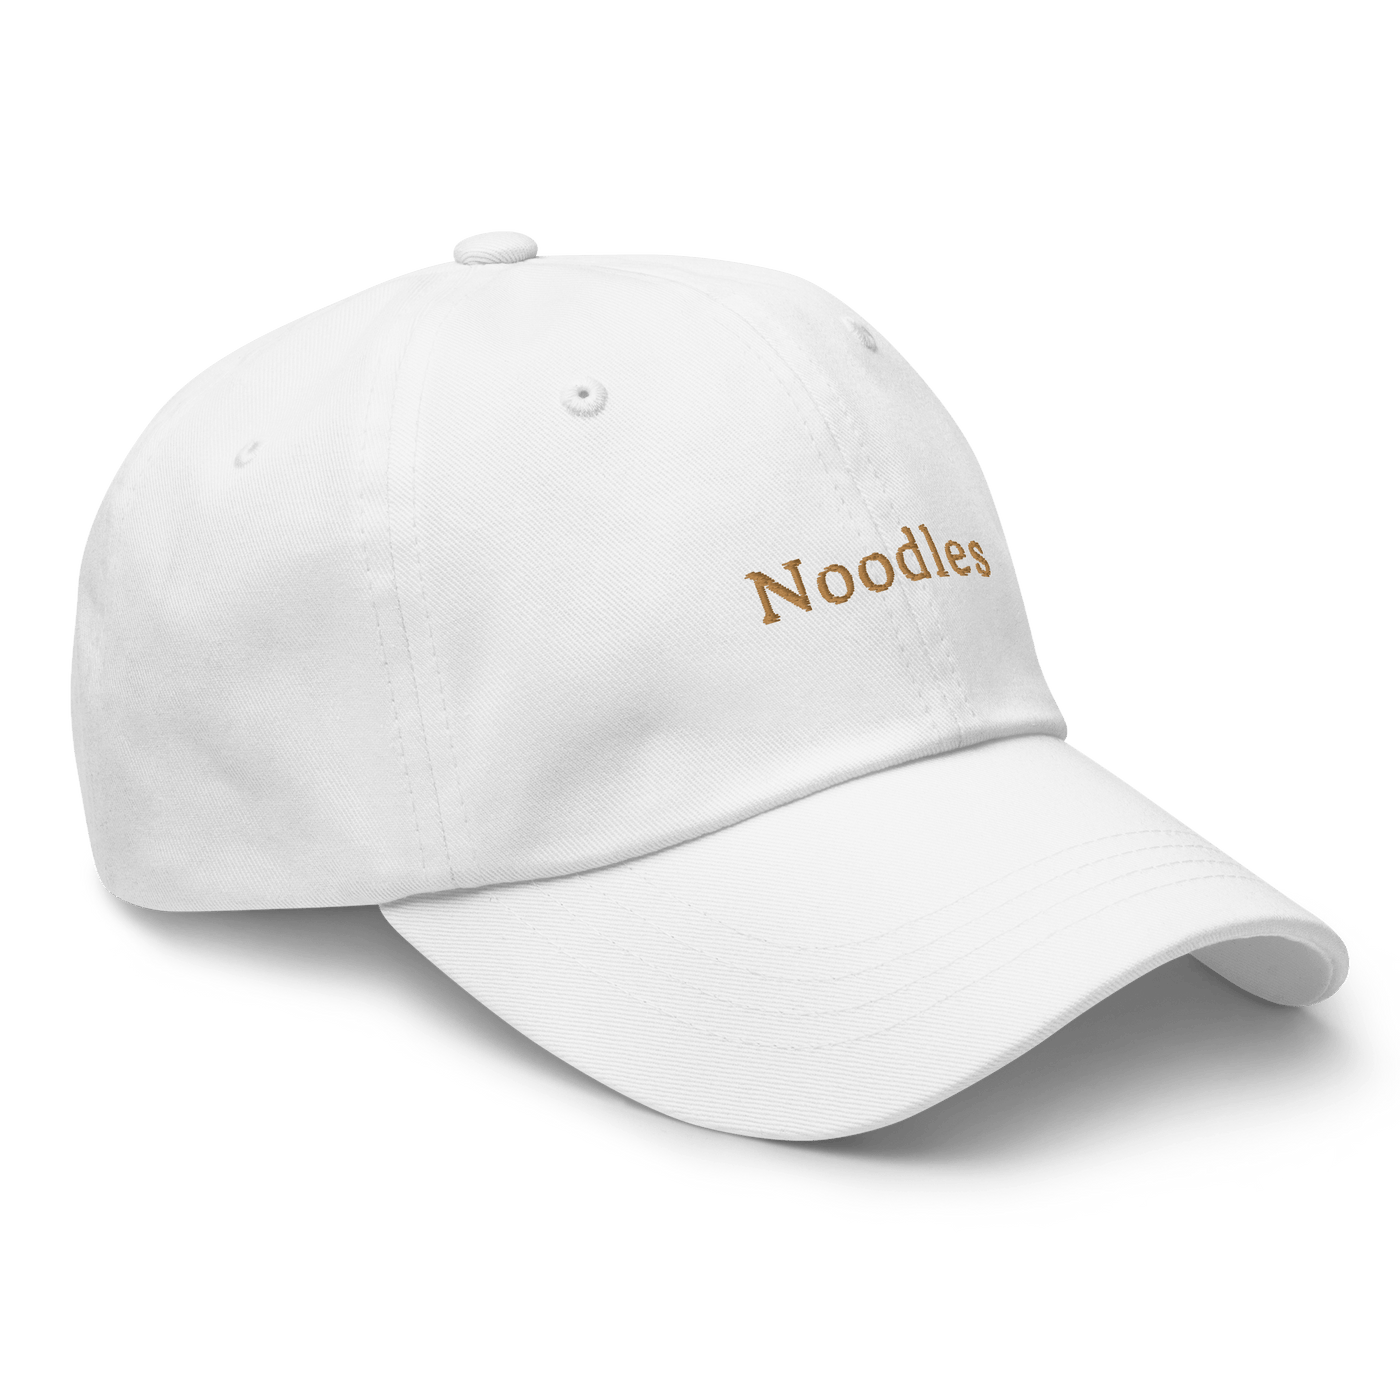 Noodles Dad hat - White - - Just Another Cap Store